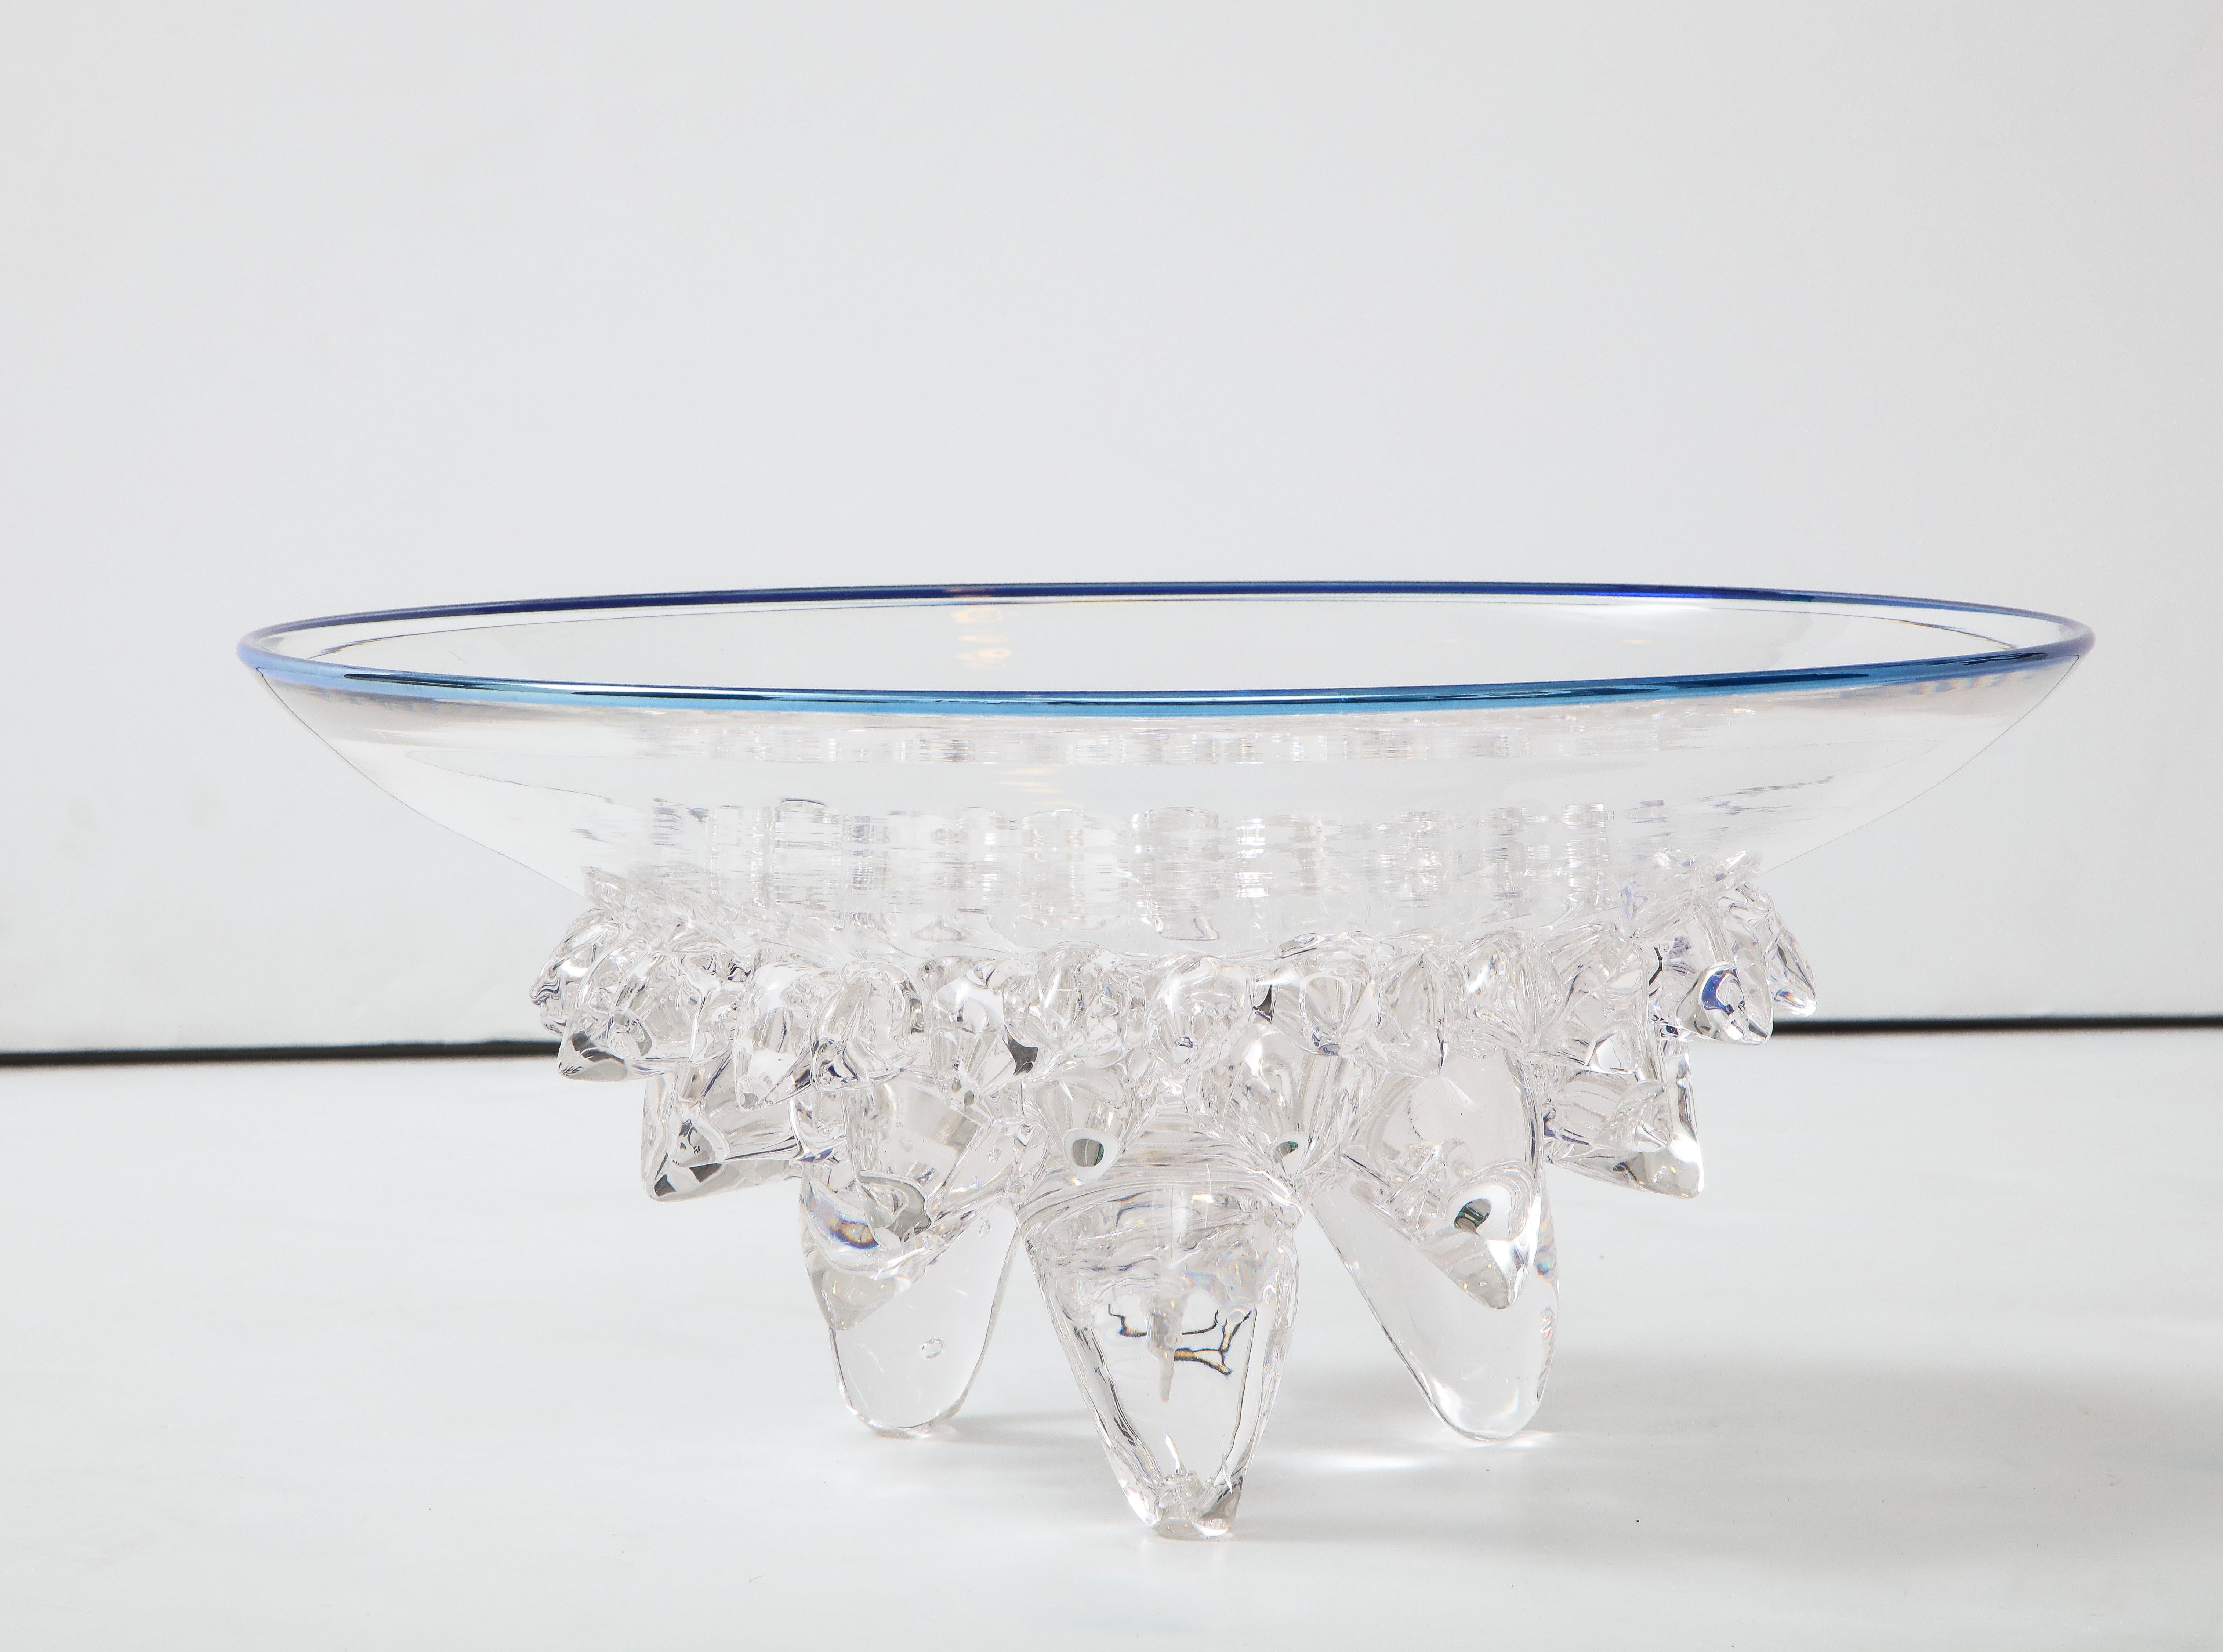 Mesmerizing handmade art glass centerpiece vessel with abstract thorn supports 
and platinum edge.